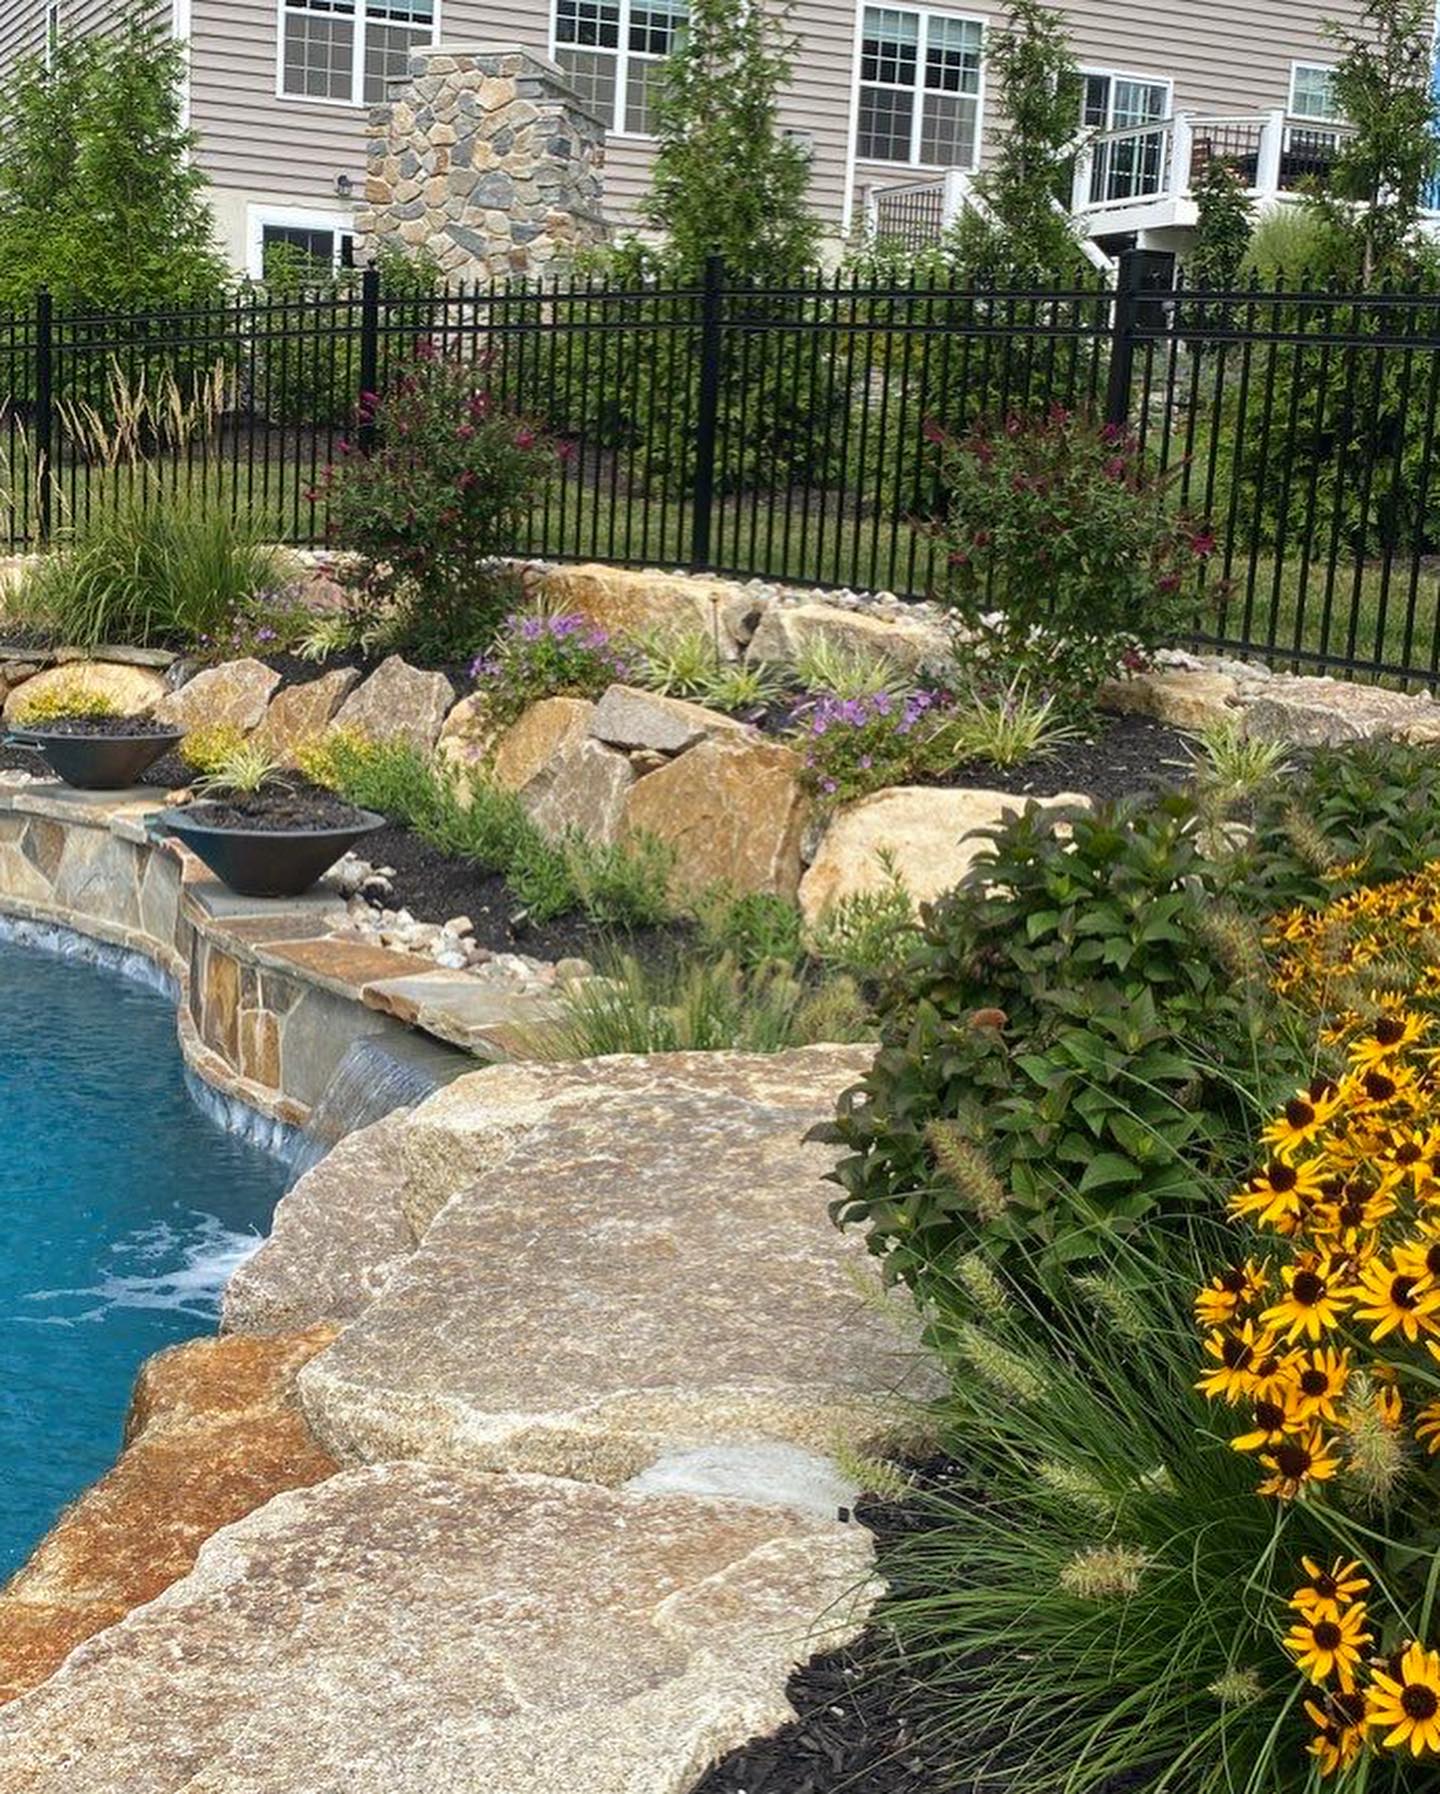 Retaining wall using Techo-Bloc 6” Mini Creta Architectural caps in beautiful chestnut brown, and stone granite boulders - Pool and Patio Retreat - New Projects by Burkholder Landscape